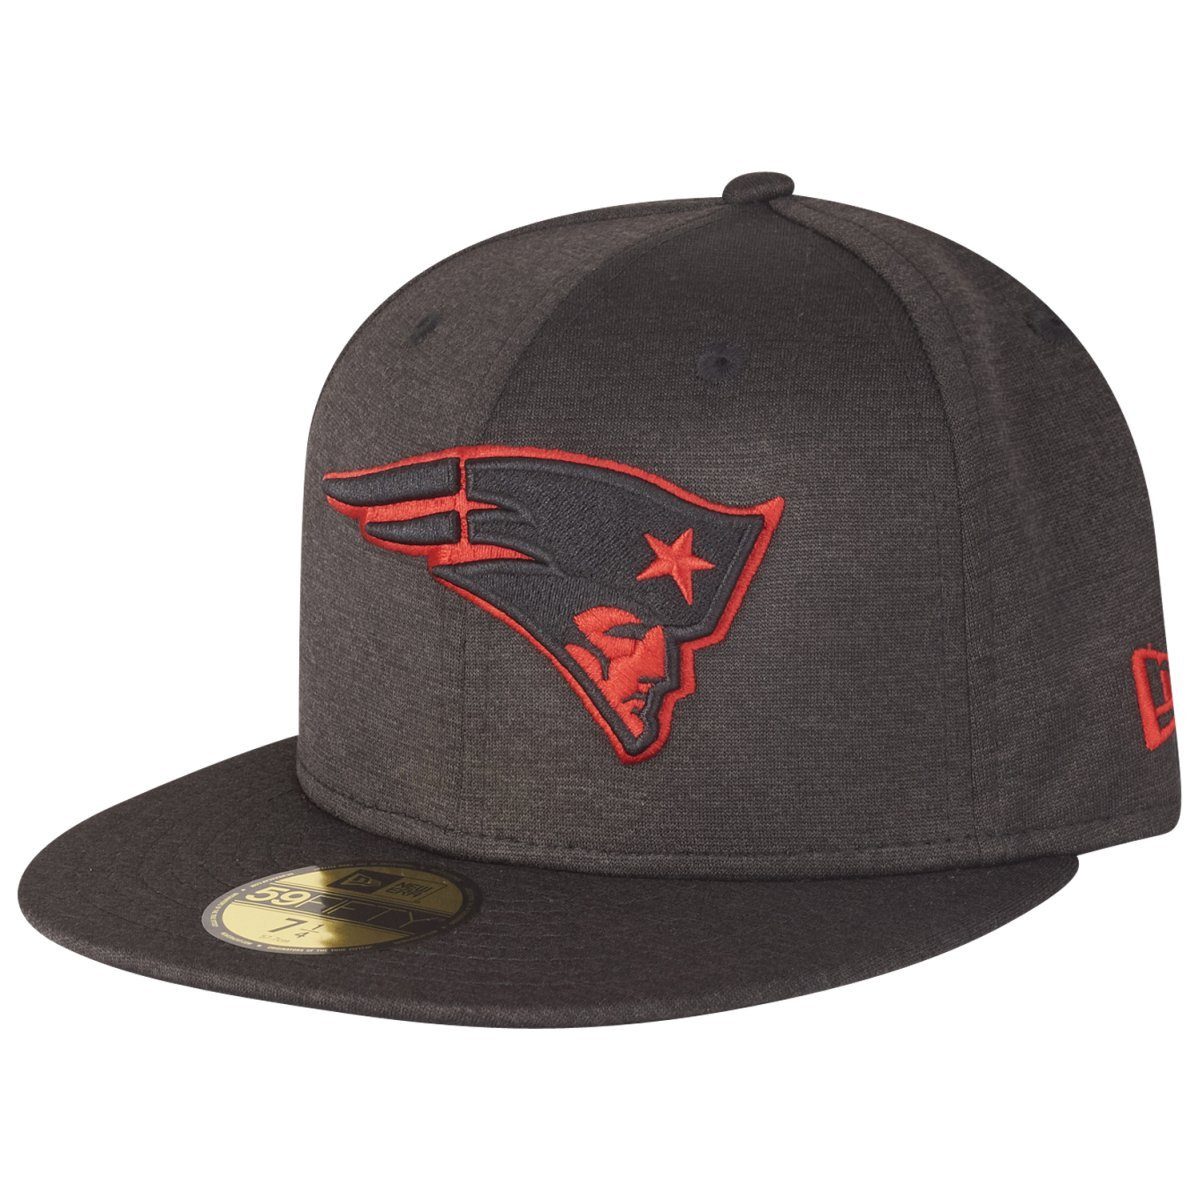 New Era Fitted Cap 59Fifty SHADOW TECH NFL New England Patriots